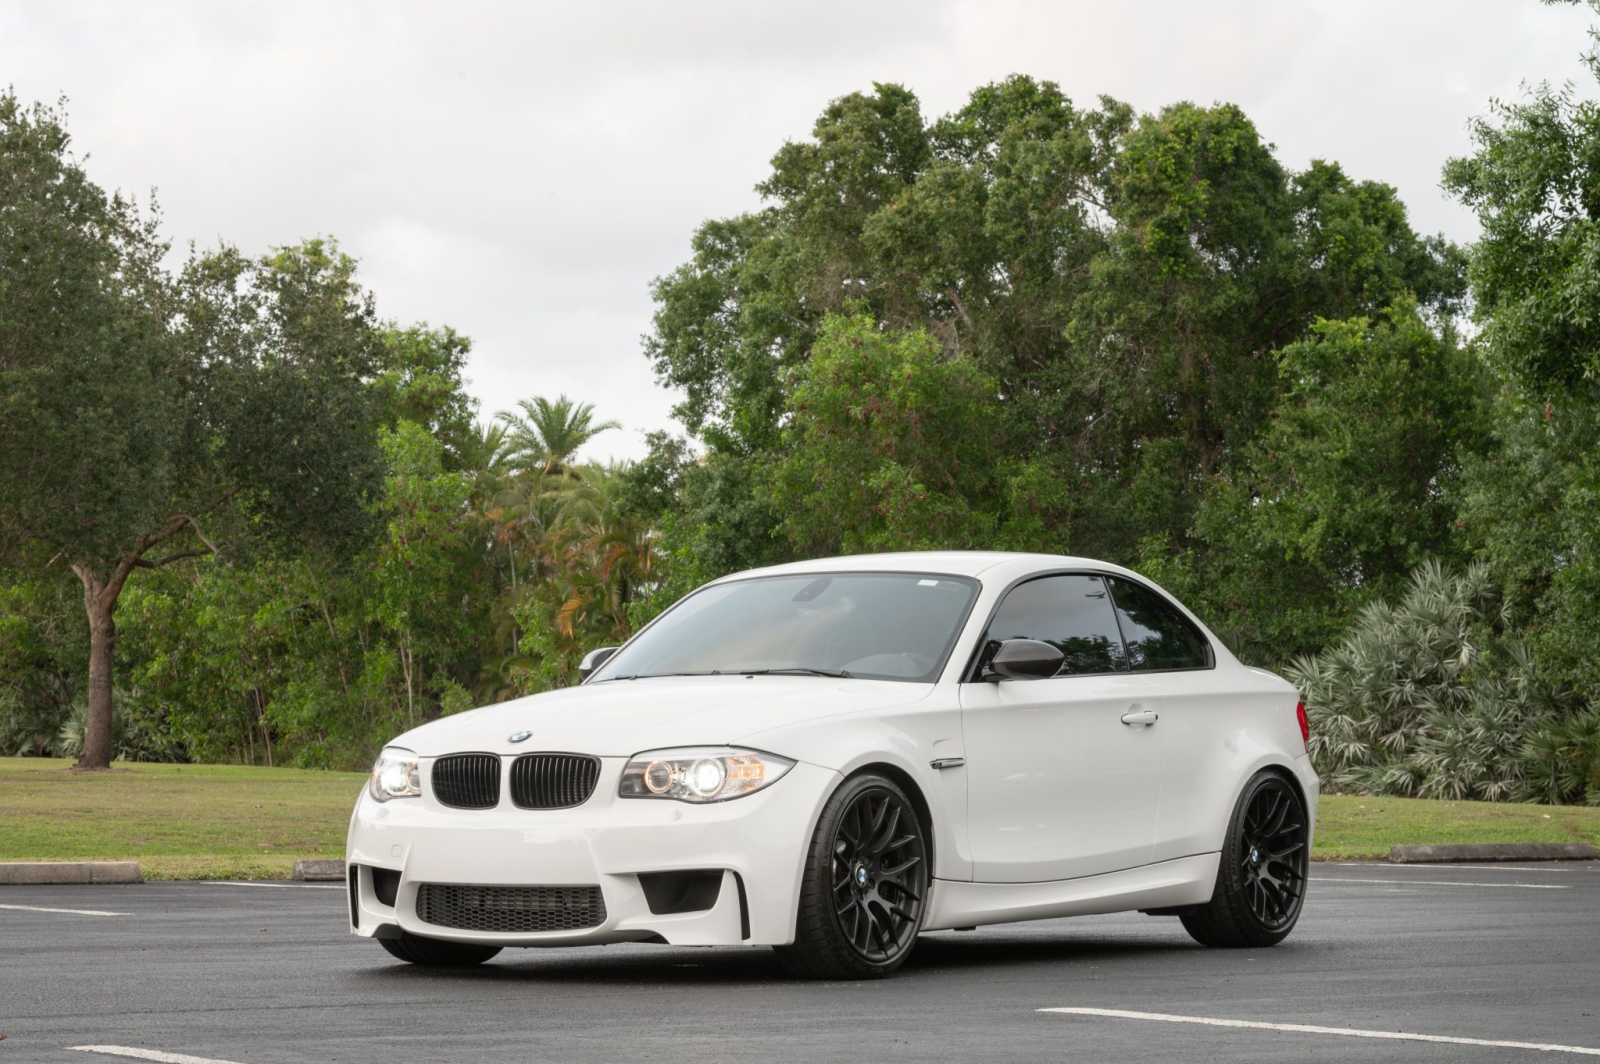 2011 BMW 1-Series M Coupe in Alpine White 3 over Black Boston Leather with Orange Stitching